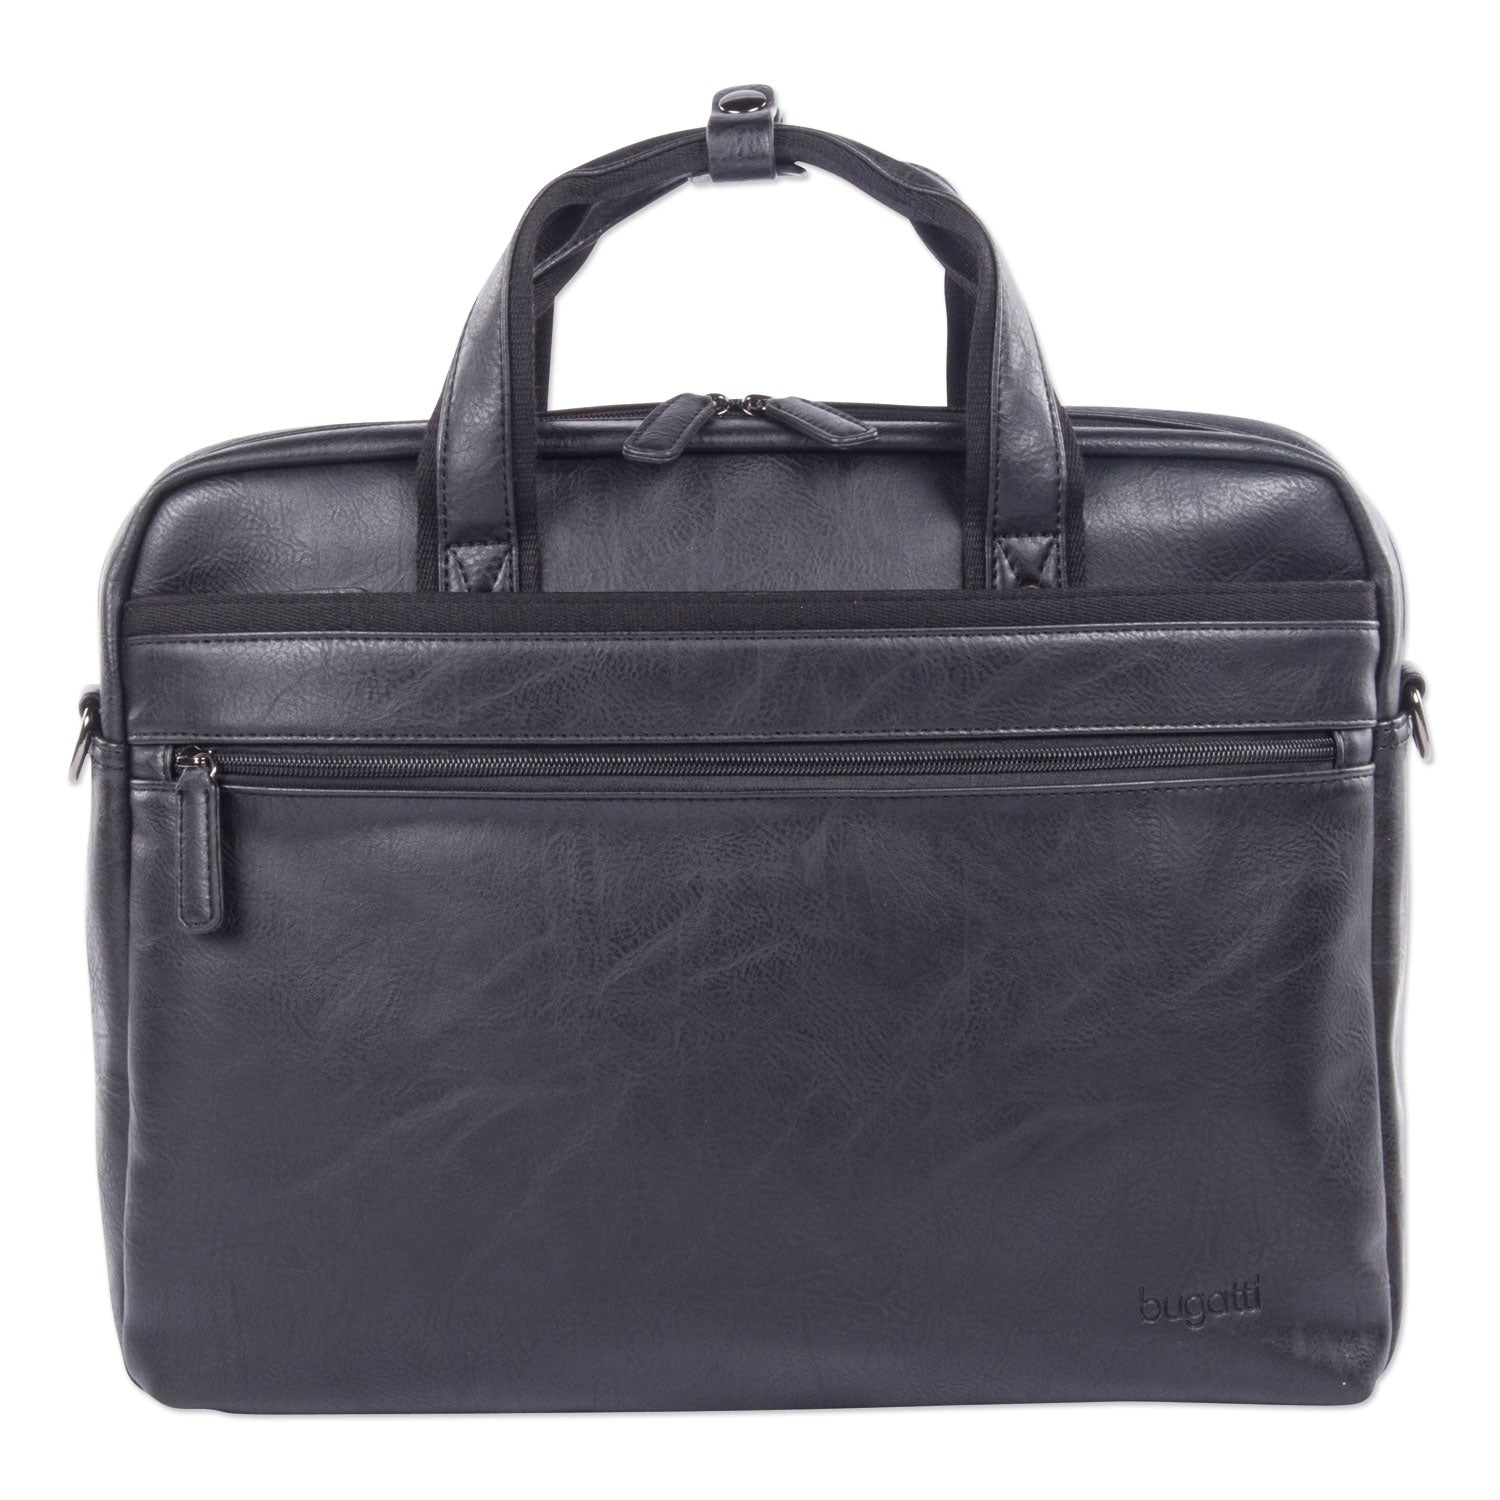 valais-executive-briefcase-fits-devices-up-to-156-leather-475-x-475-x-115-black_swzexb532smbk - 2